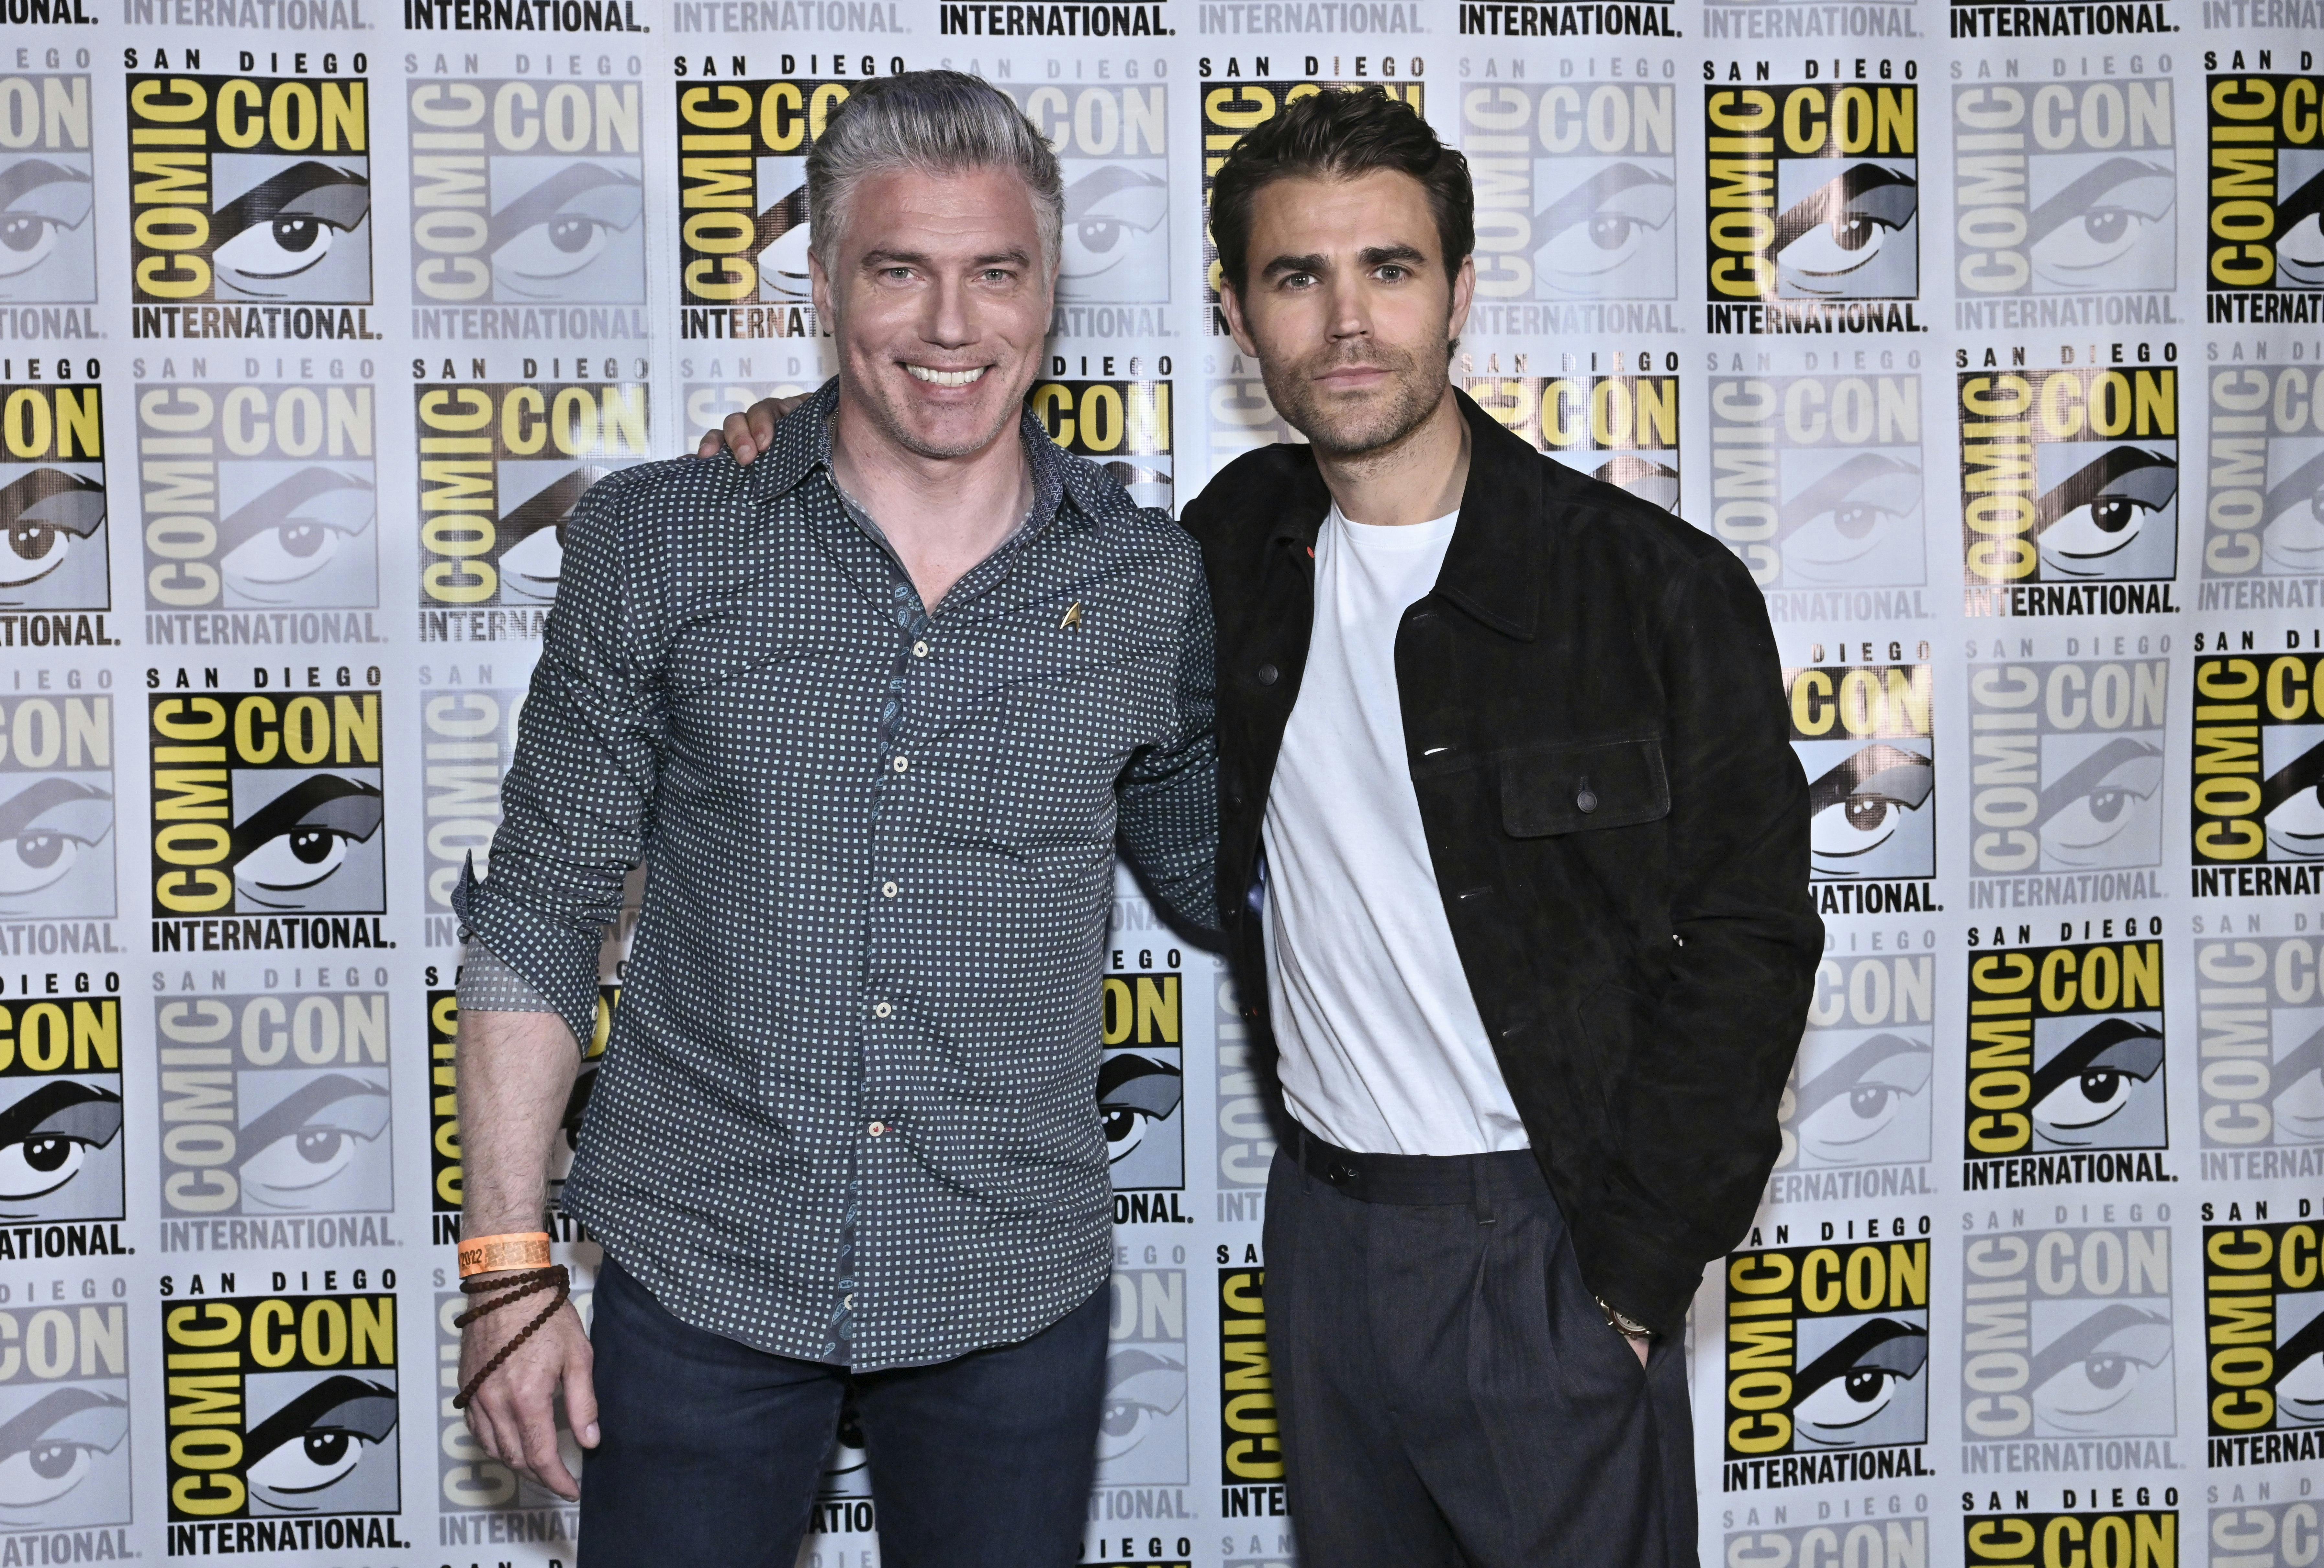 Anson Mount and Paul Wesley pose for a photo.